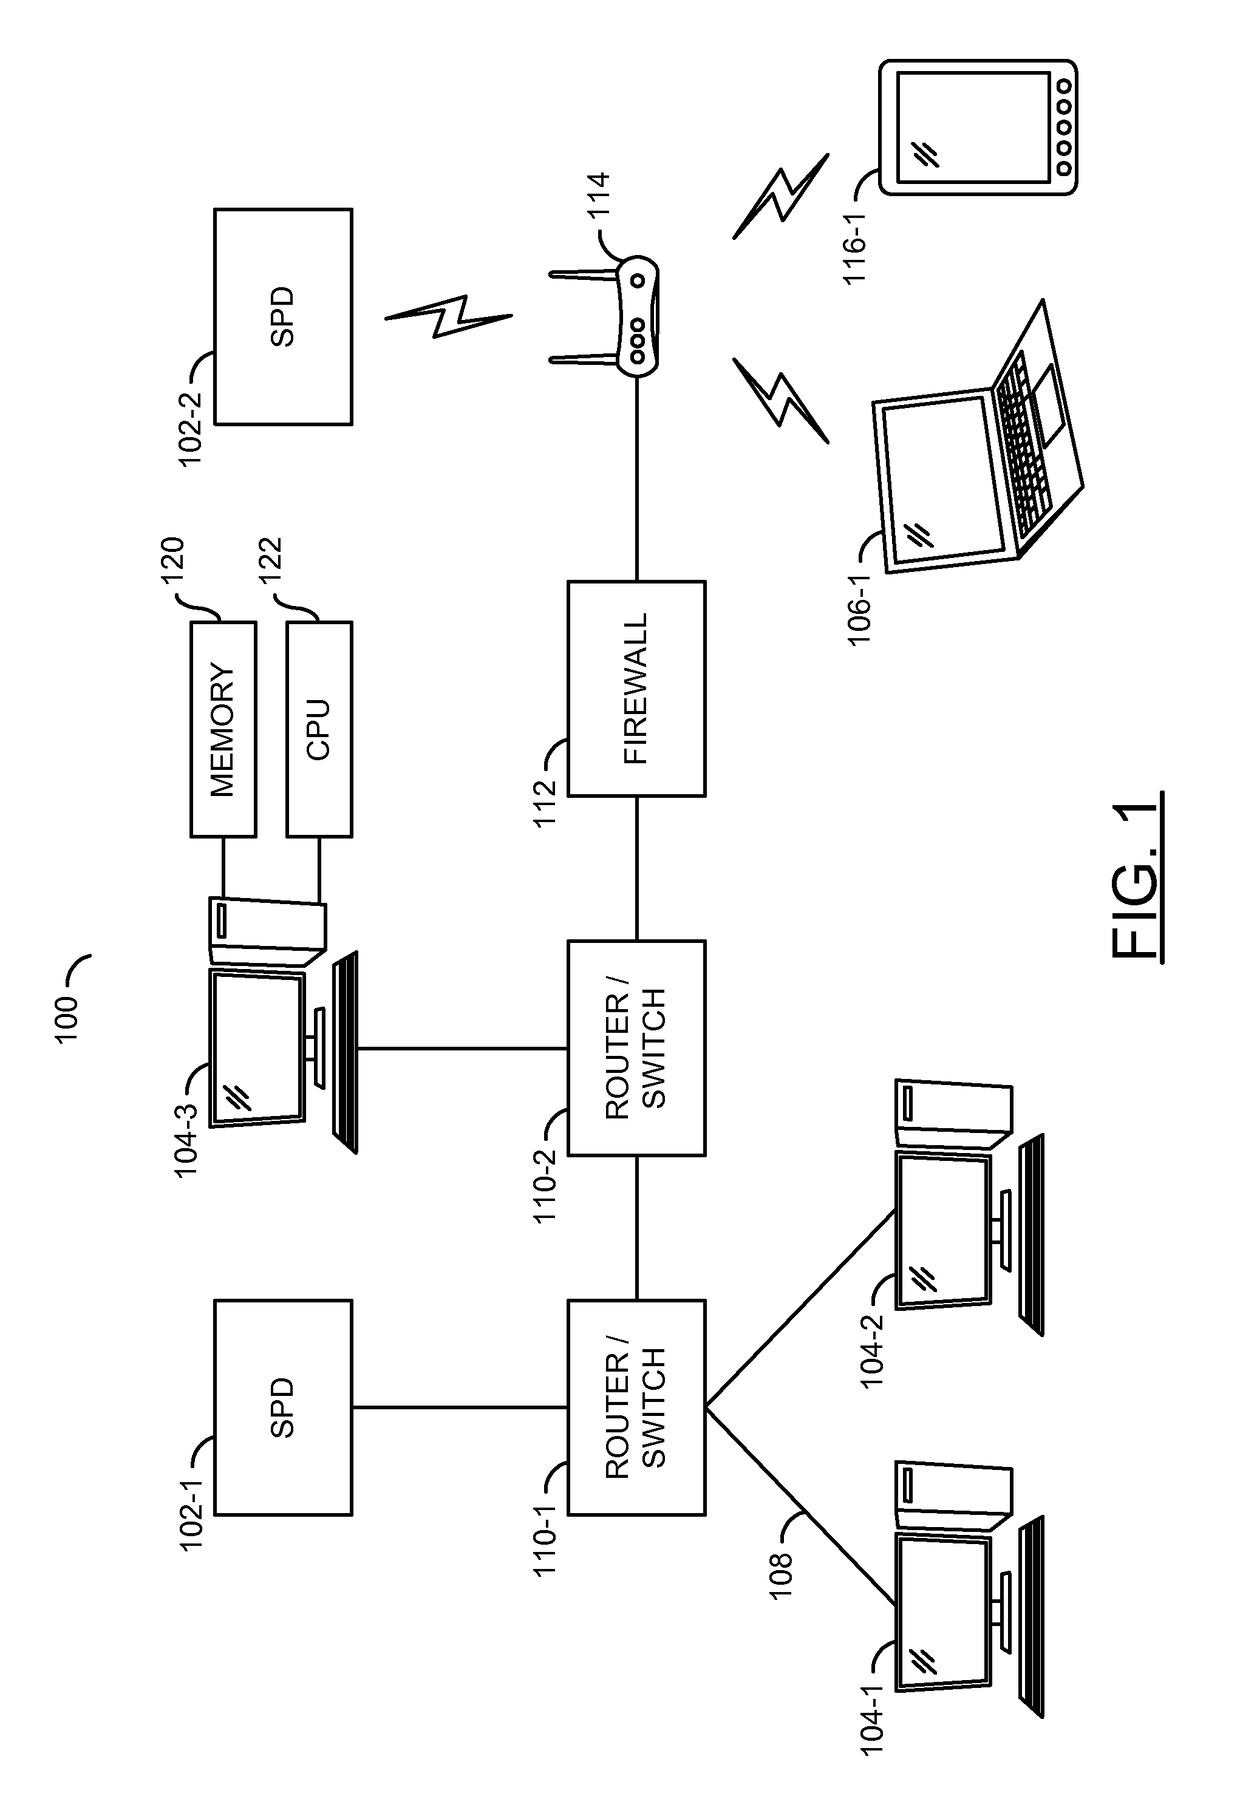 Predictive power management in a wireless sensor network using activity costs